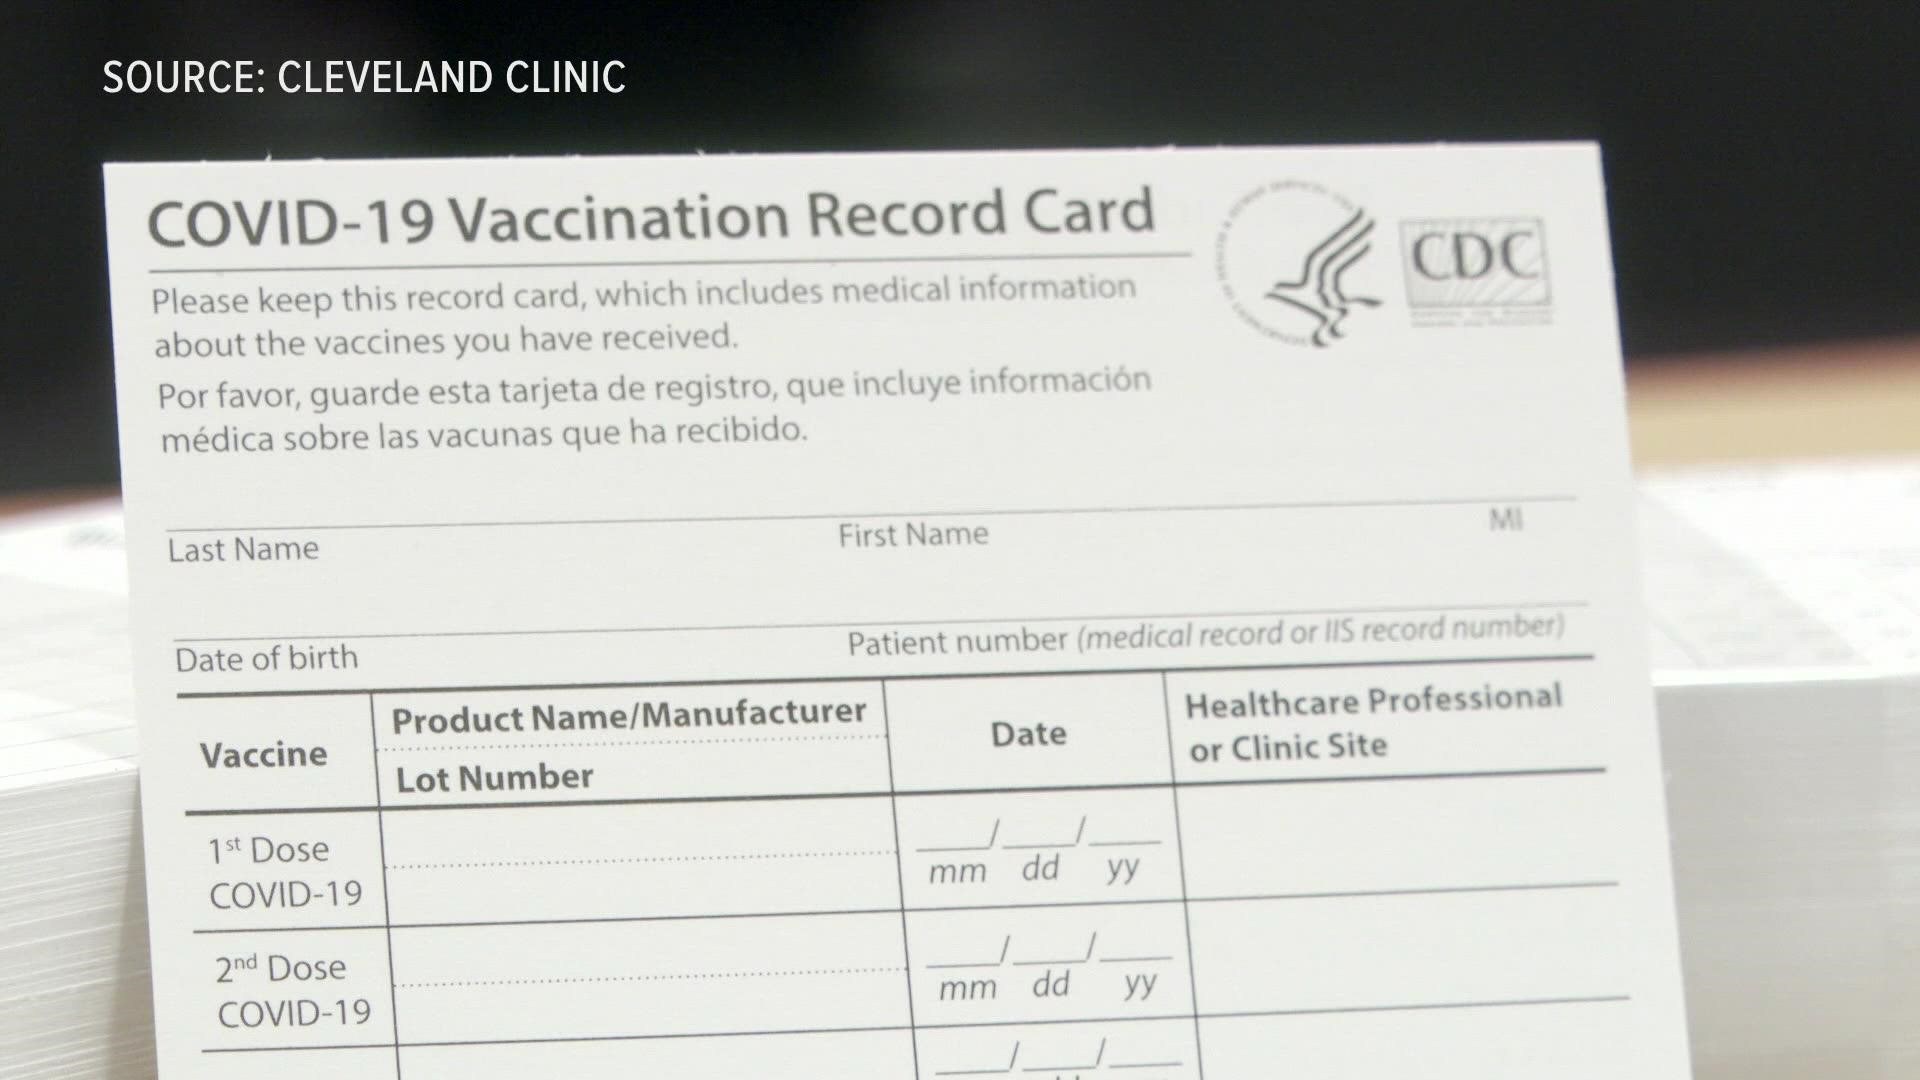 "To produce a fake vaccine card and cause others to have a level of security, that's unwarranted," said Marcia Mansaray, deputy health officer for Ottawa County.